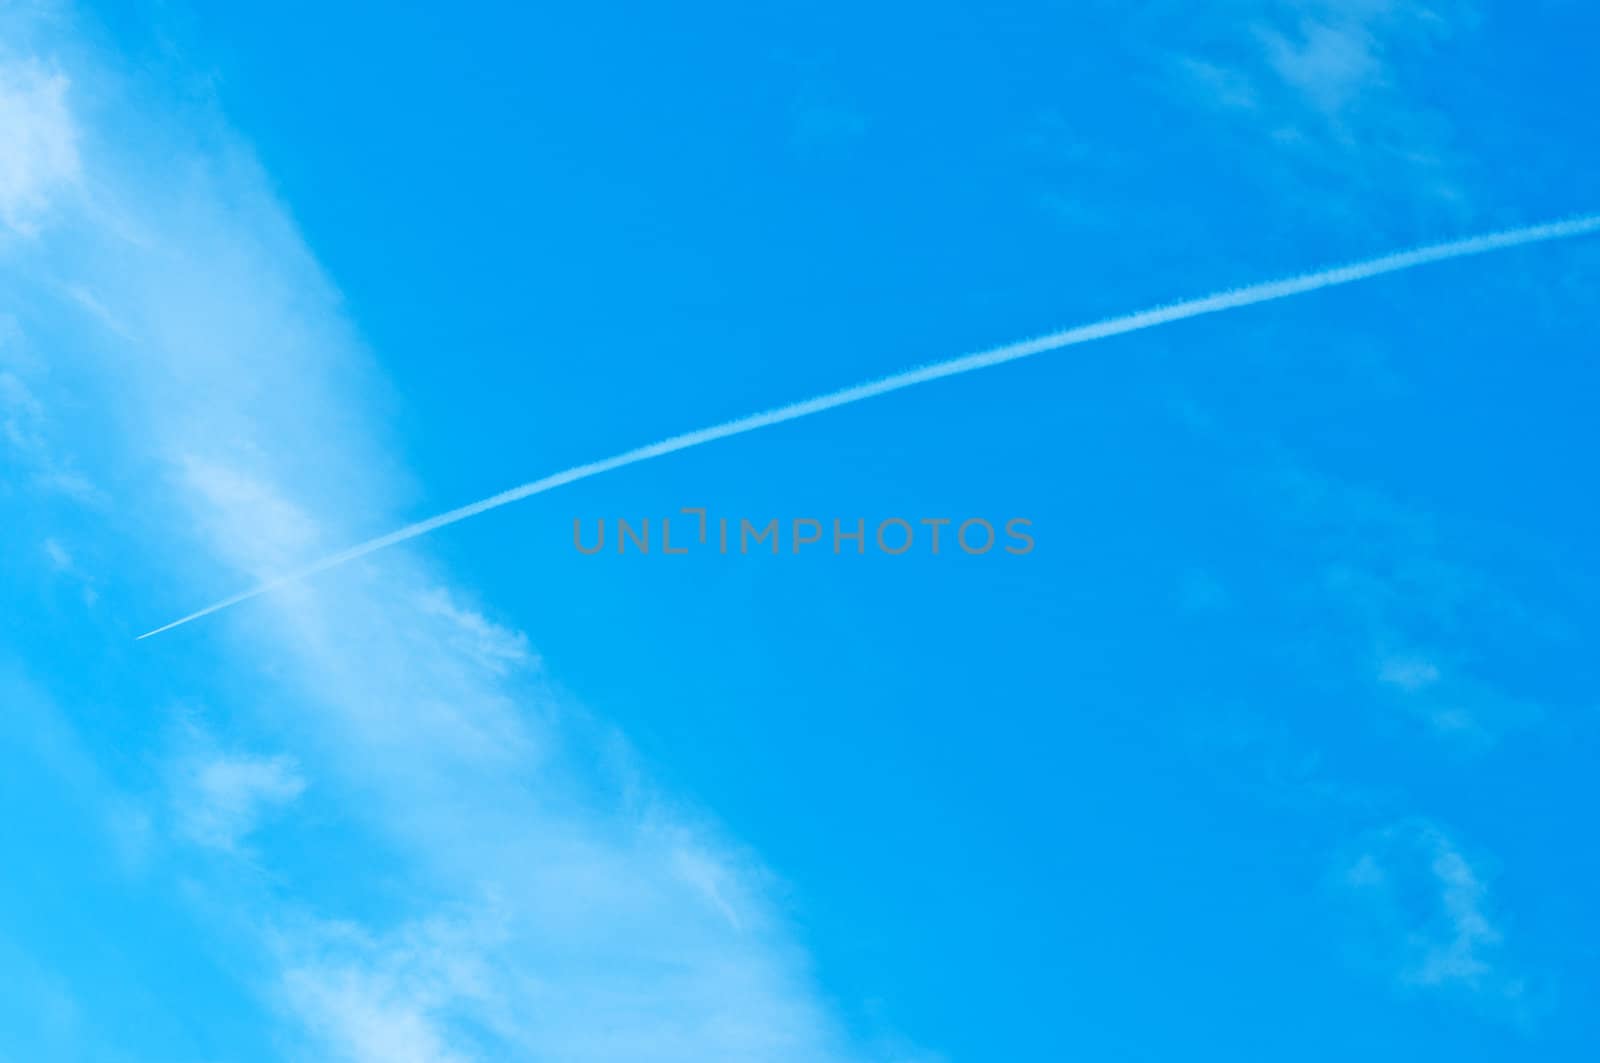 Trace of an airoplane on a cloudy blue sky